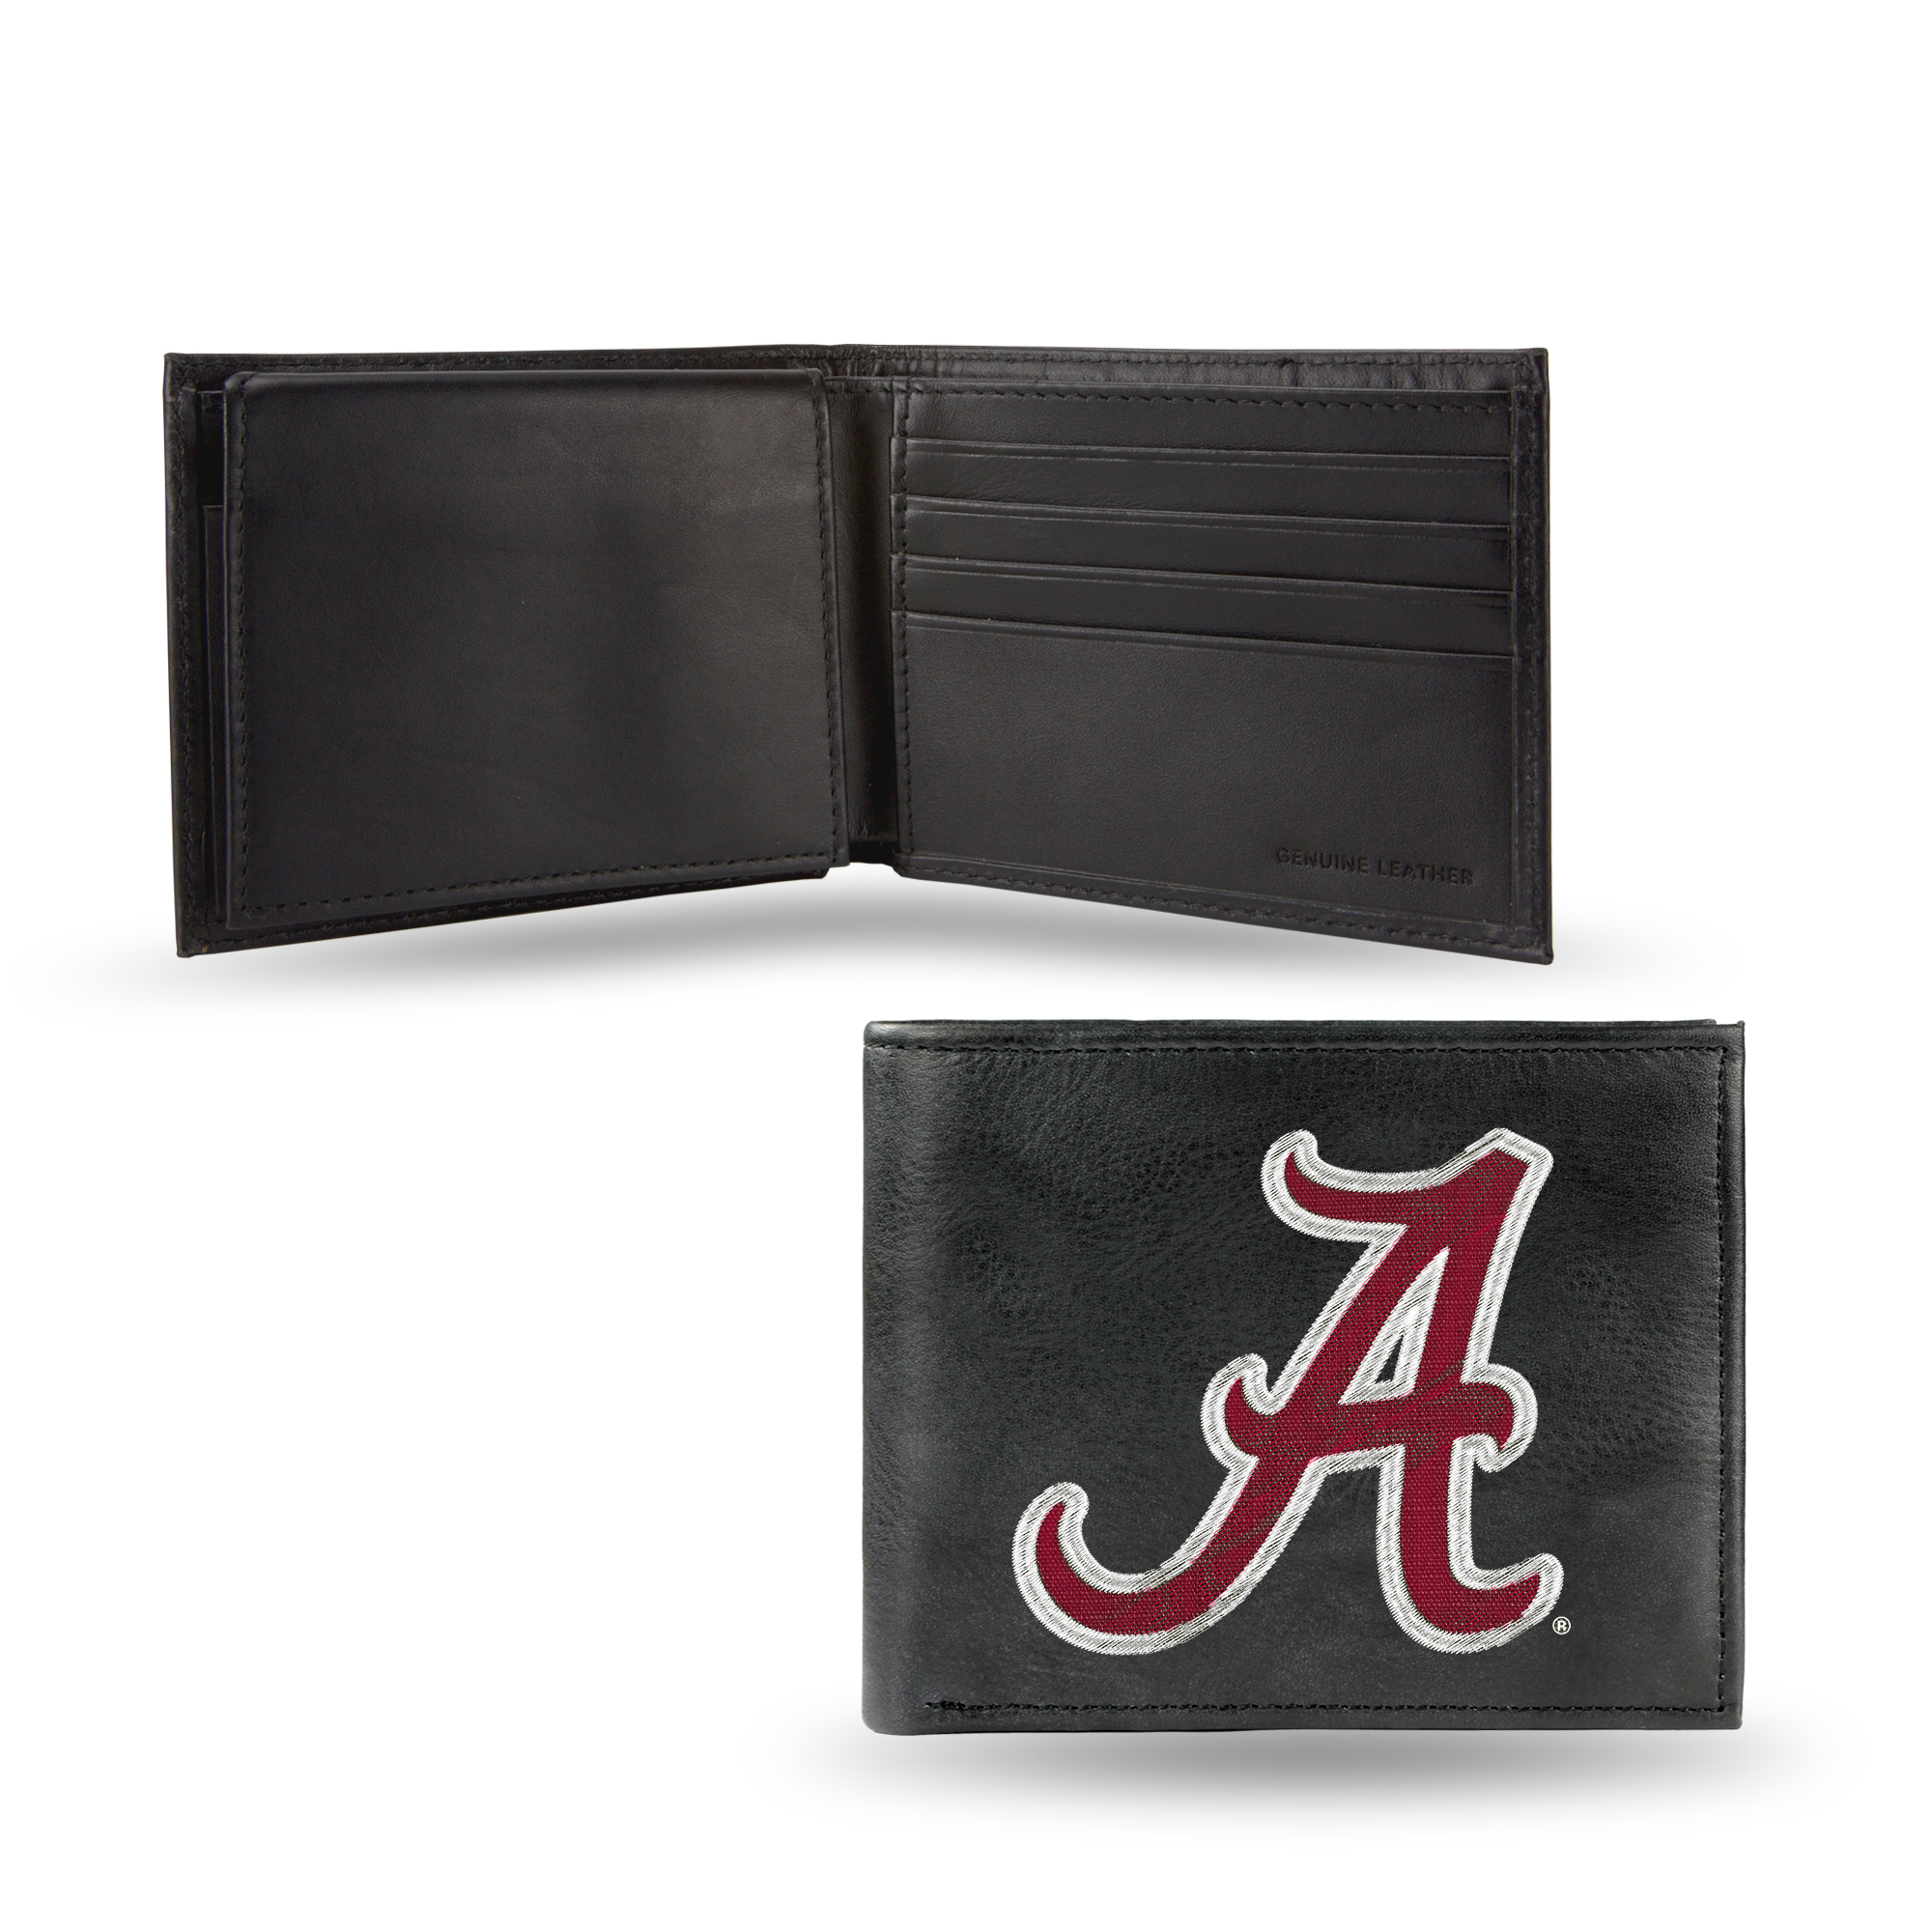 Rico Industries College Alabama  Embroidered Genuine Leather Billfold Wallet 3.25" x 4.25" - Slim - image 1 of 2